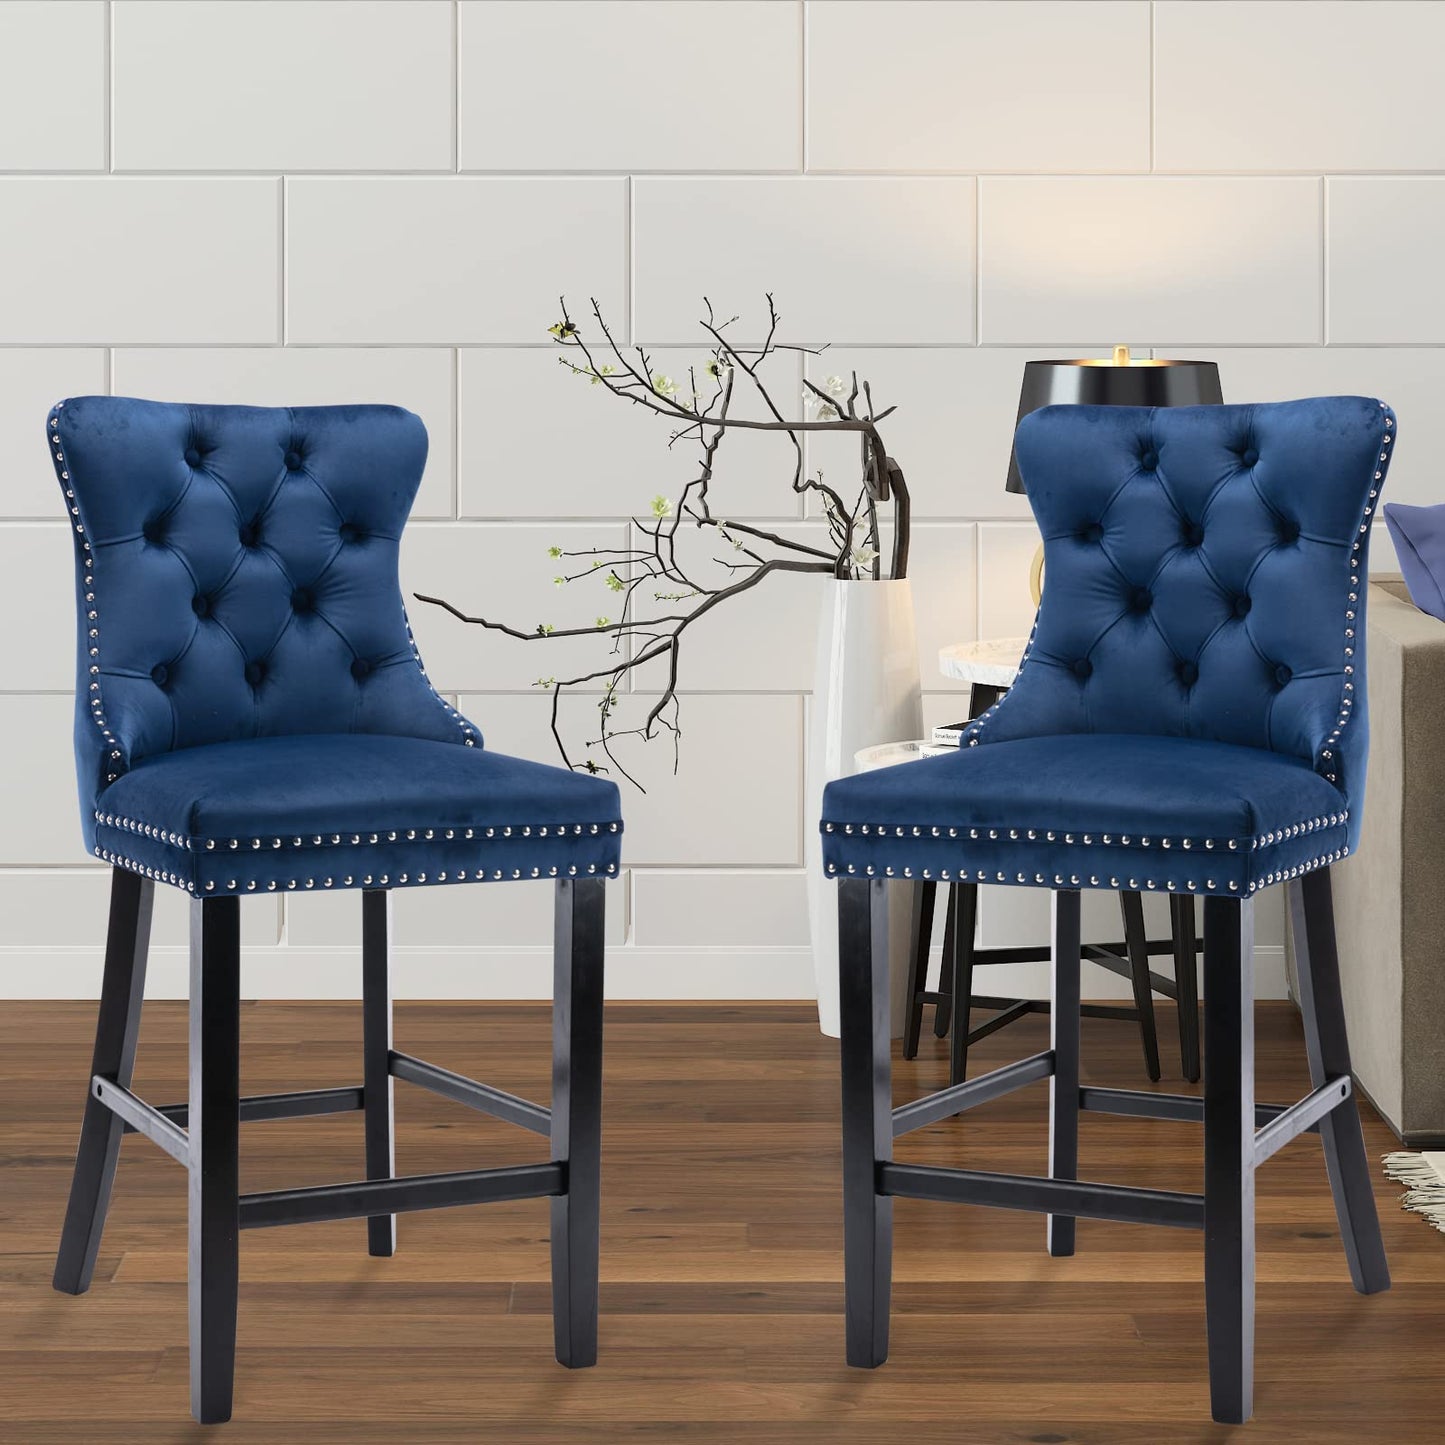 2X Velvet Bar Stools with Studs Trim Wooden Legs Tufted Dining Chairs Kitchen - image23